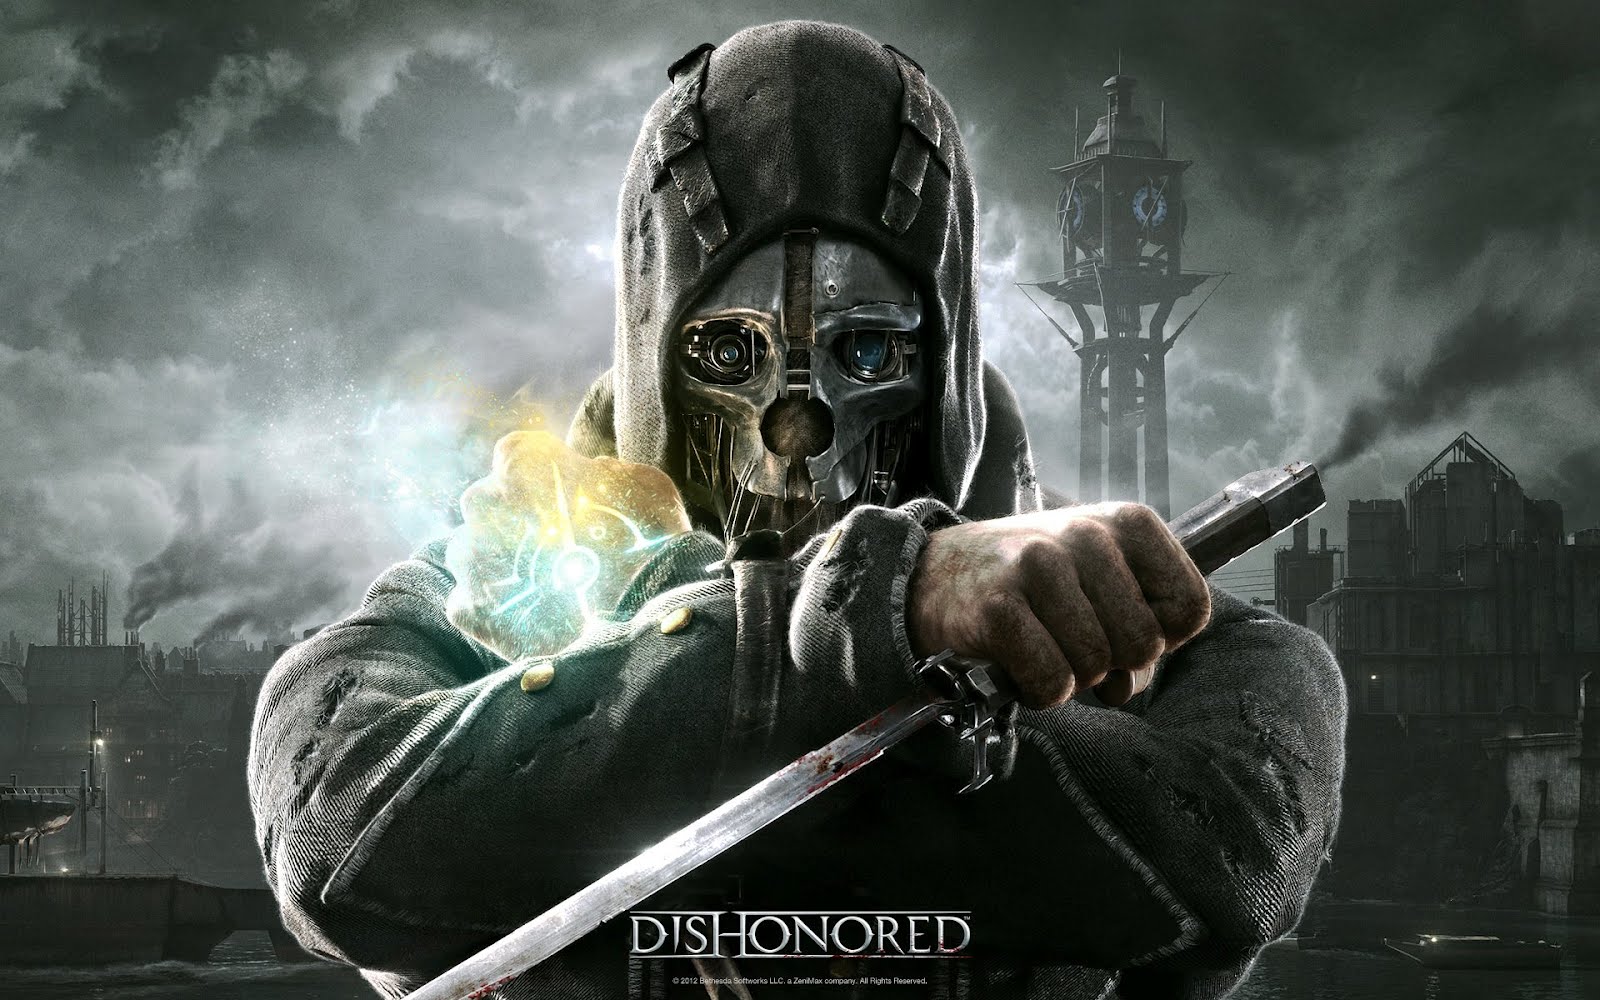 Dishonored Stealth Trailer